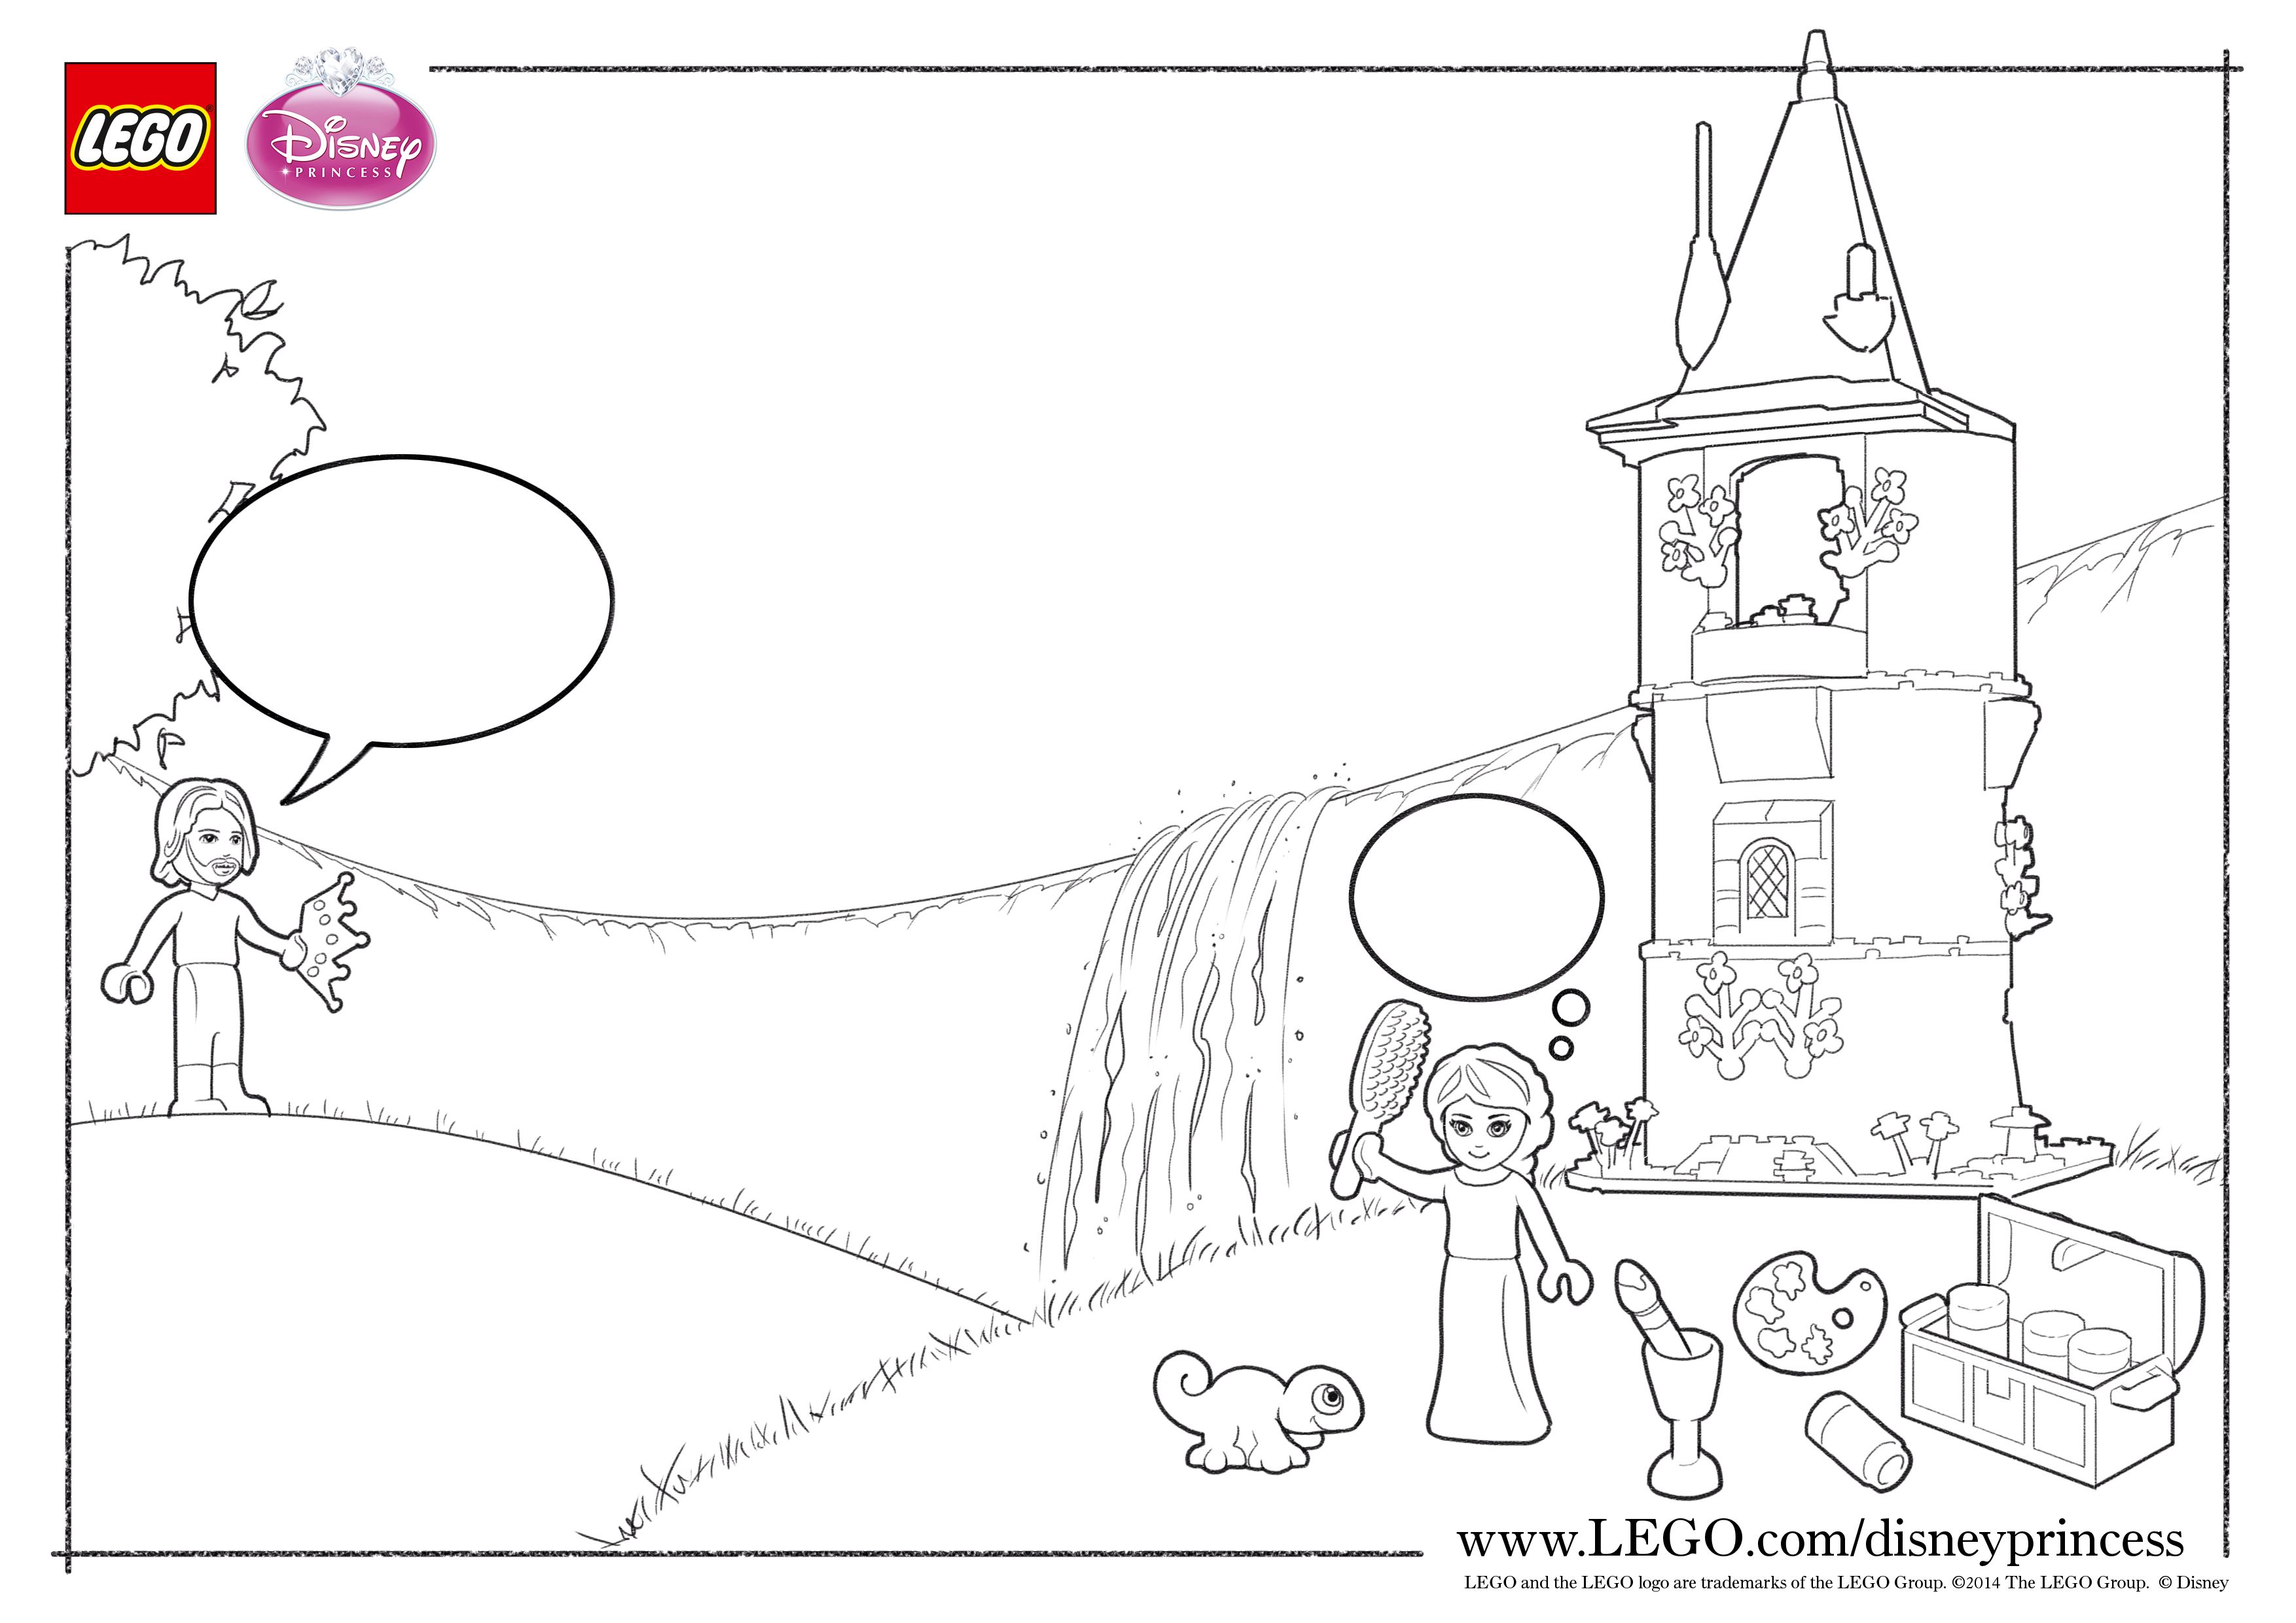 Lego Disney Princesses Coloring Pages - Coloring Home